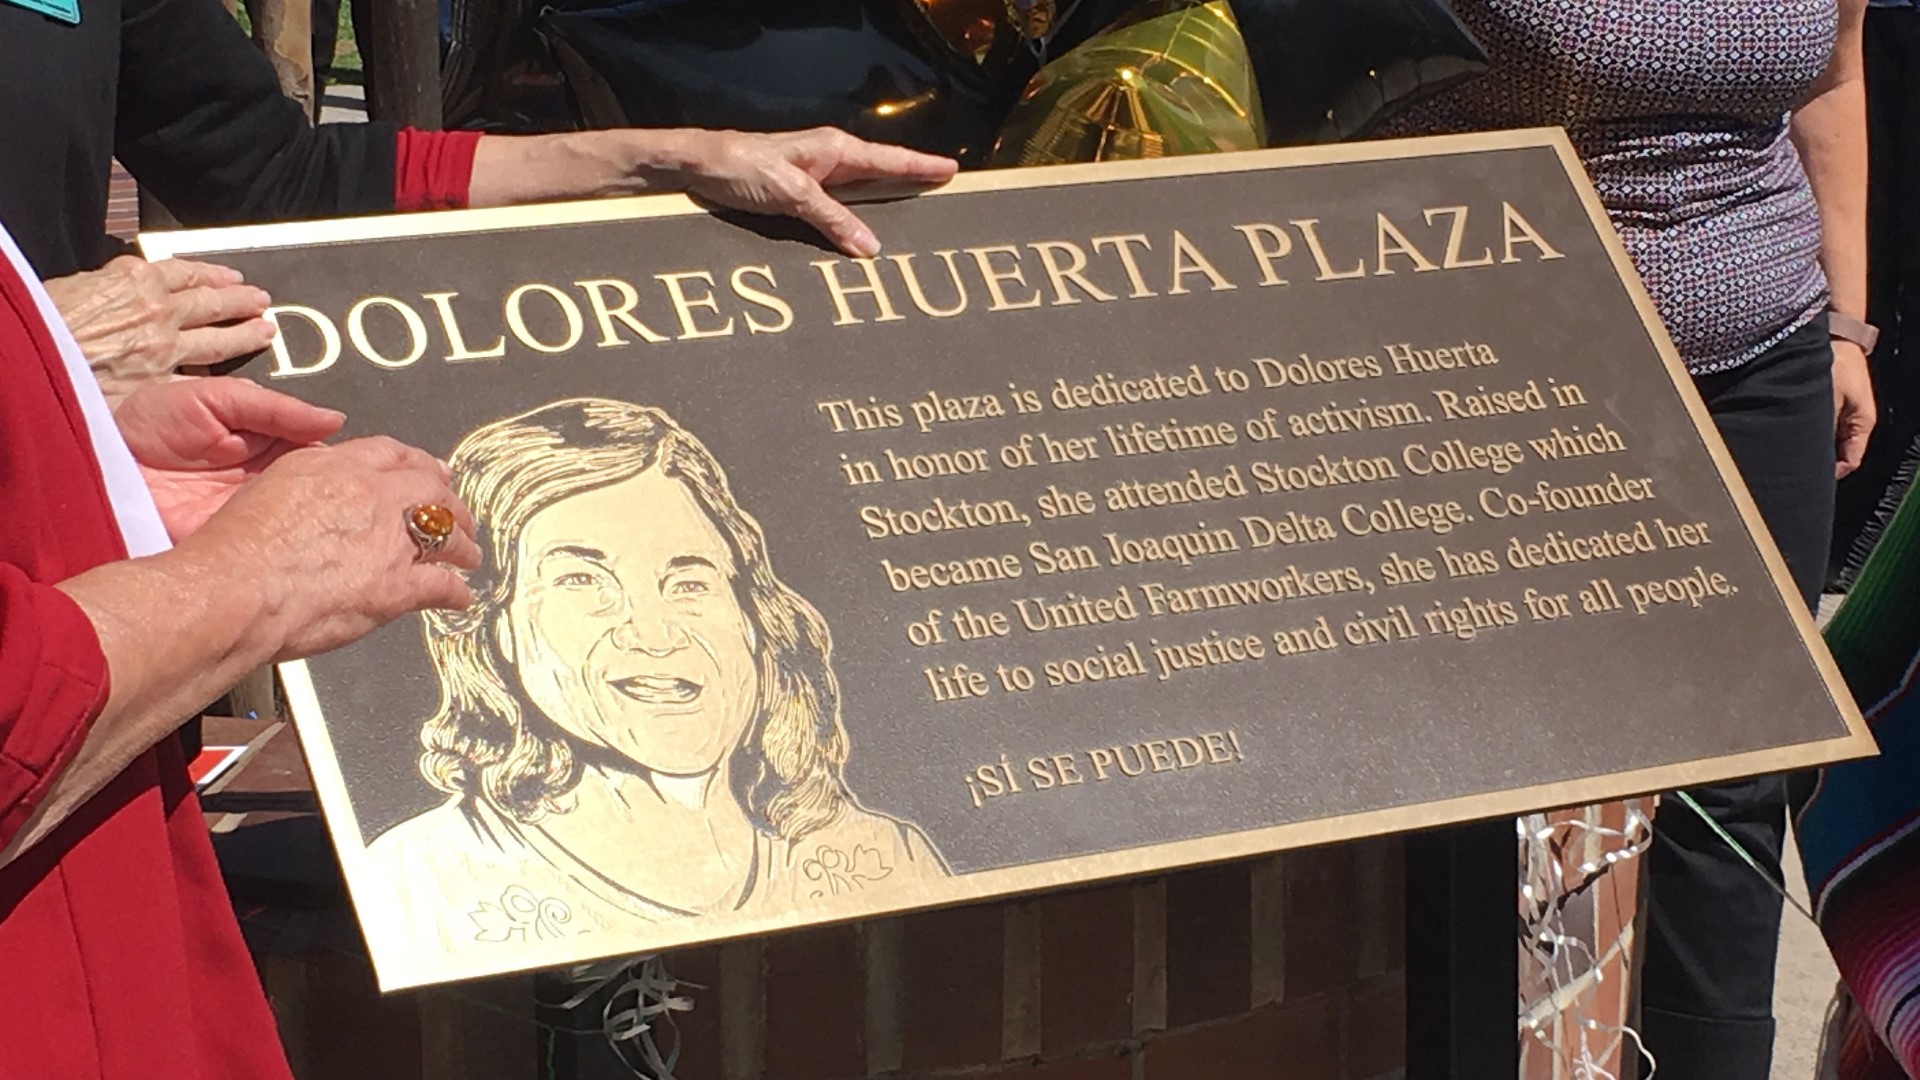 While Dolores Huerta was in Indiana speaking about Latino Heritage Month, her sister Alicia Arong stopped by Stockton at plaza dedication ceremony for her sister.